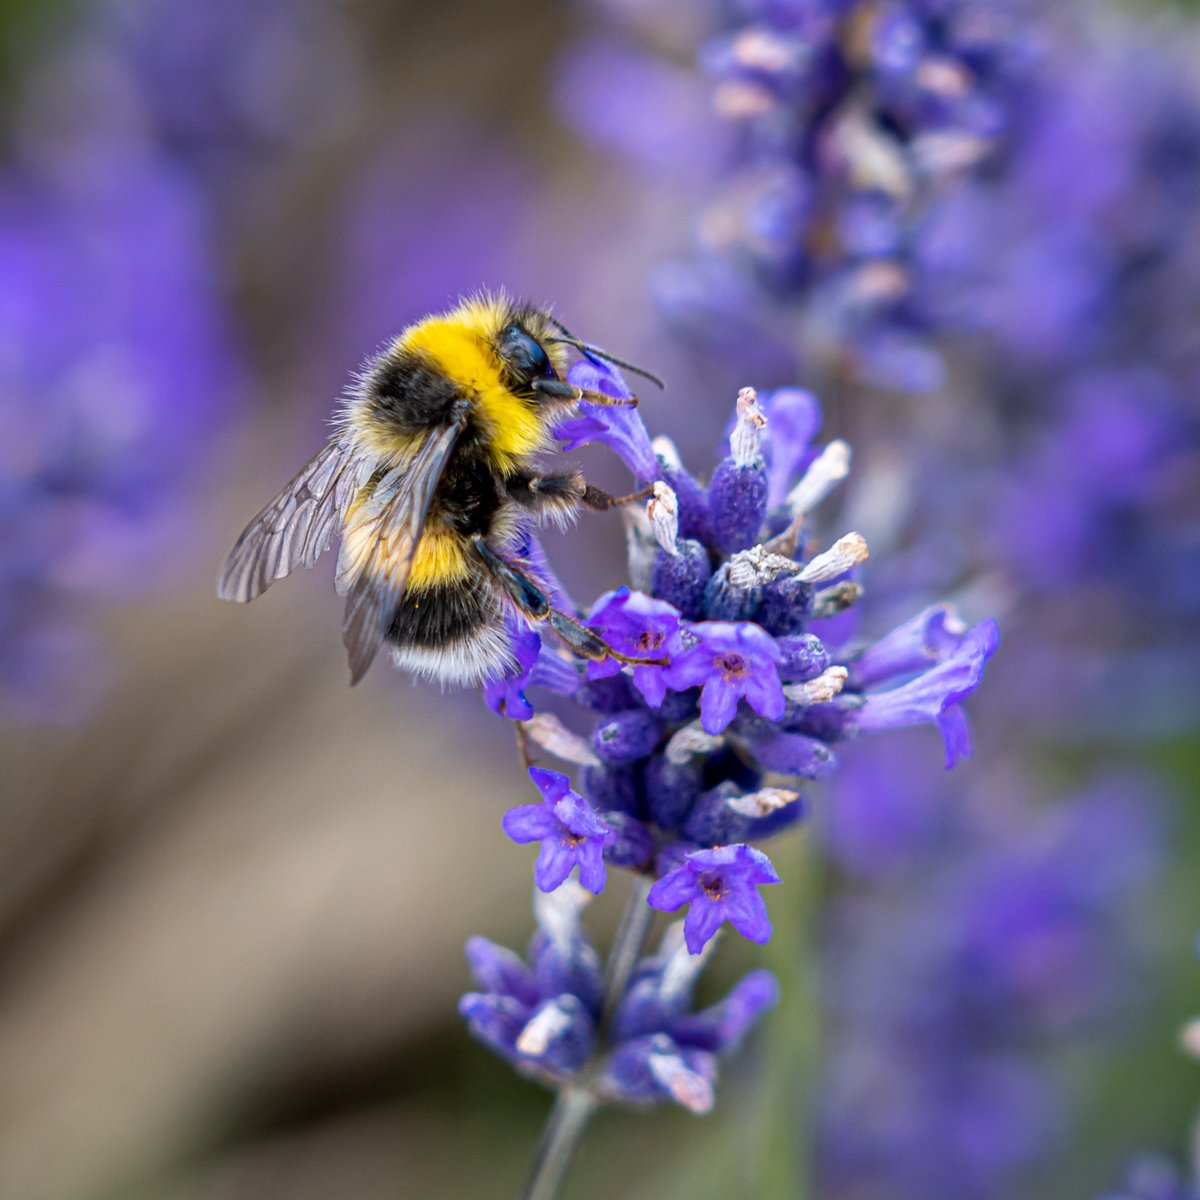 Start your pollinator-friendly garden this May! Planting lavender and wildflowers attracts bees and butterflies all summer. 🌺🐝 #GardeningTips #SaveTheBees #Superpet